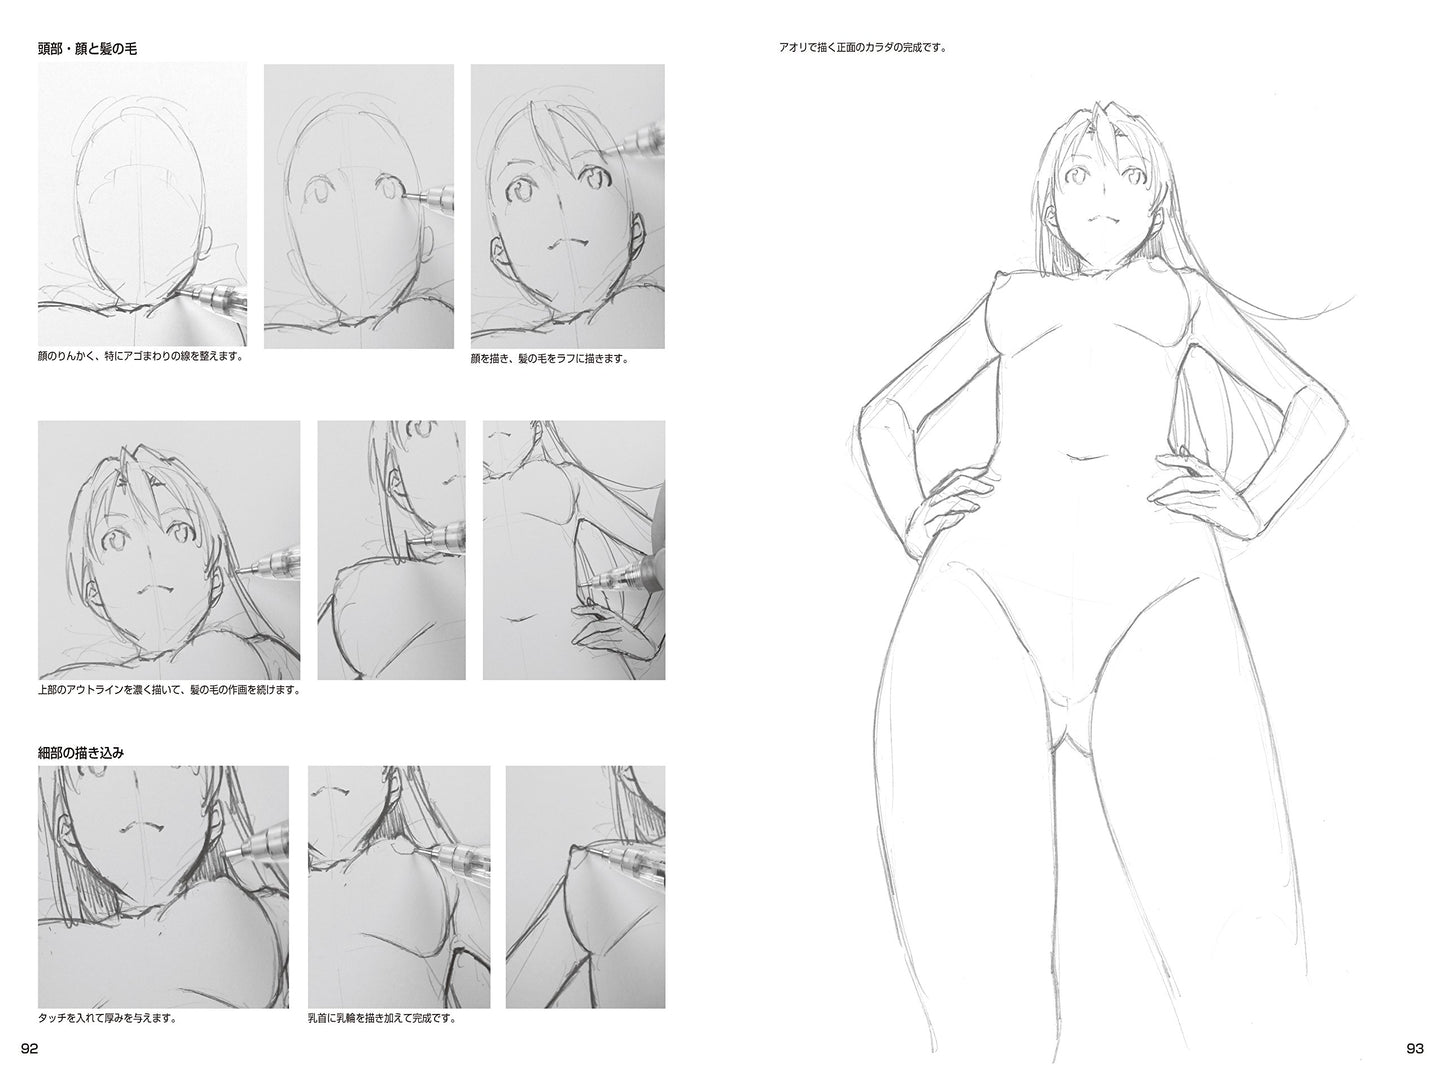 Animation Director's Female Character Drawing Techniques, Character Design, Movement, and Shadowing